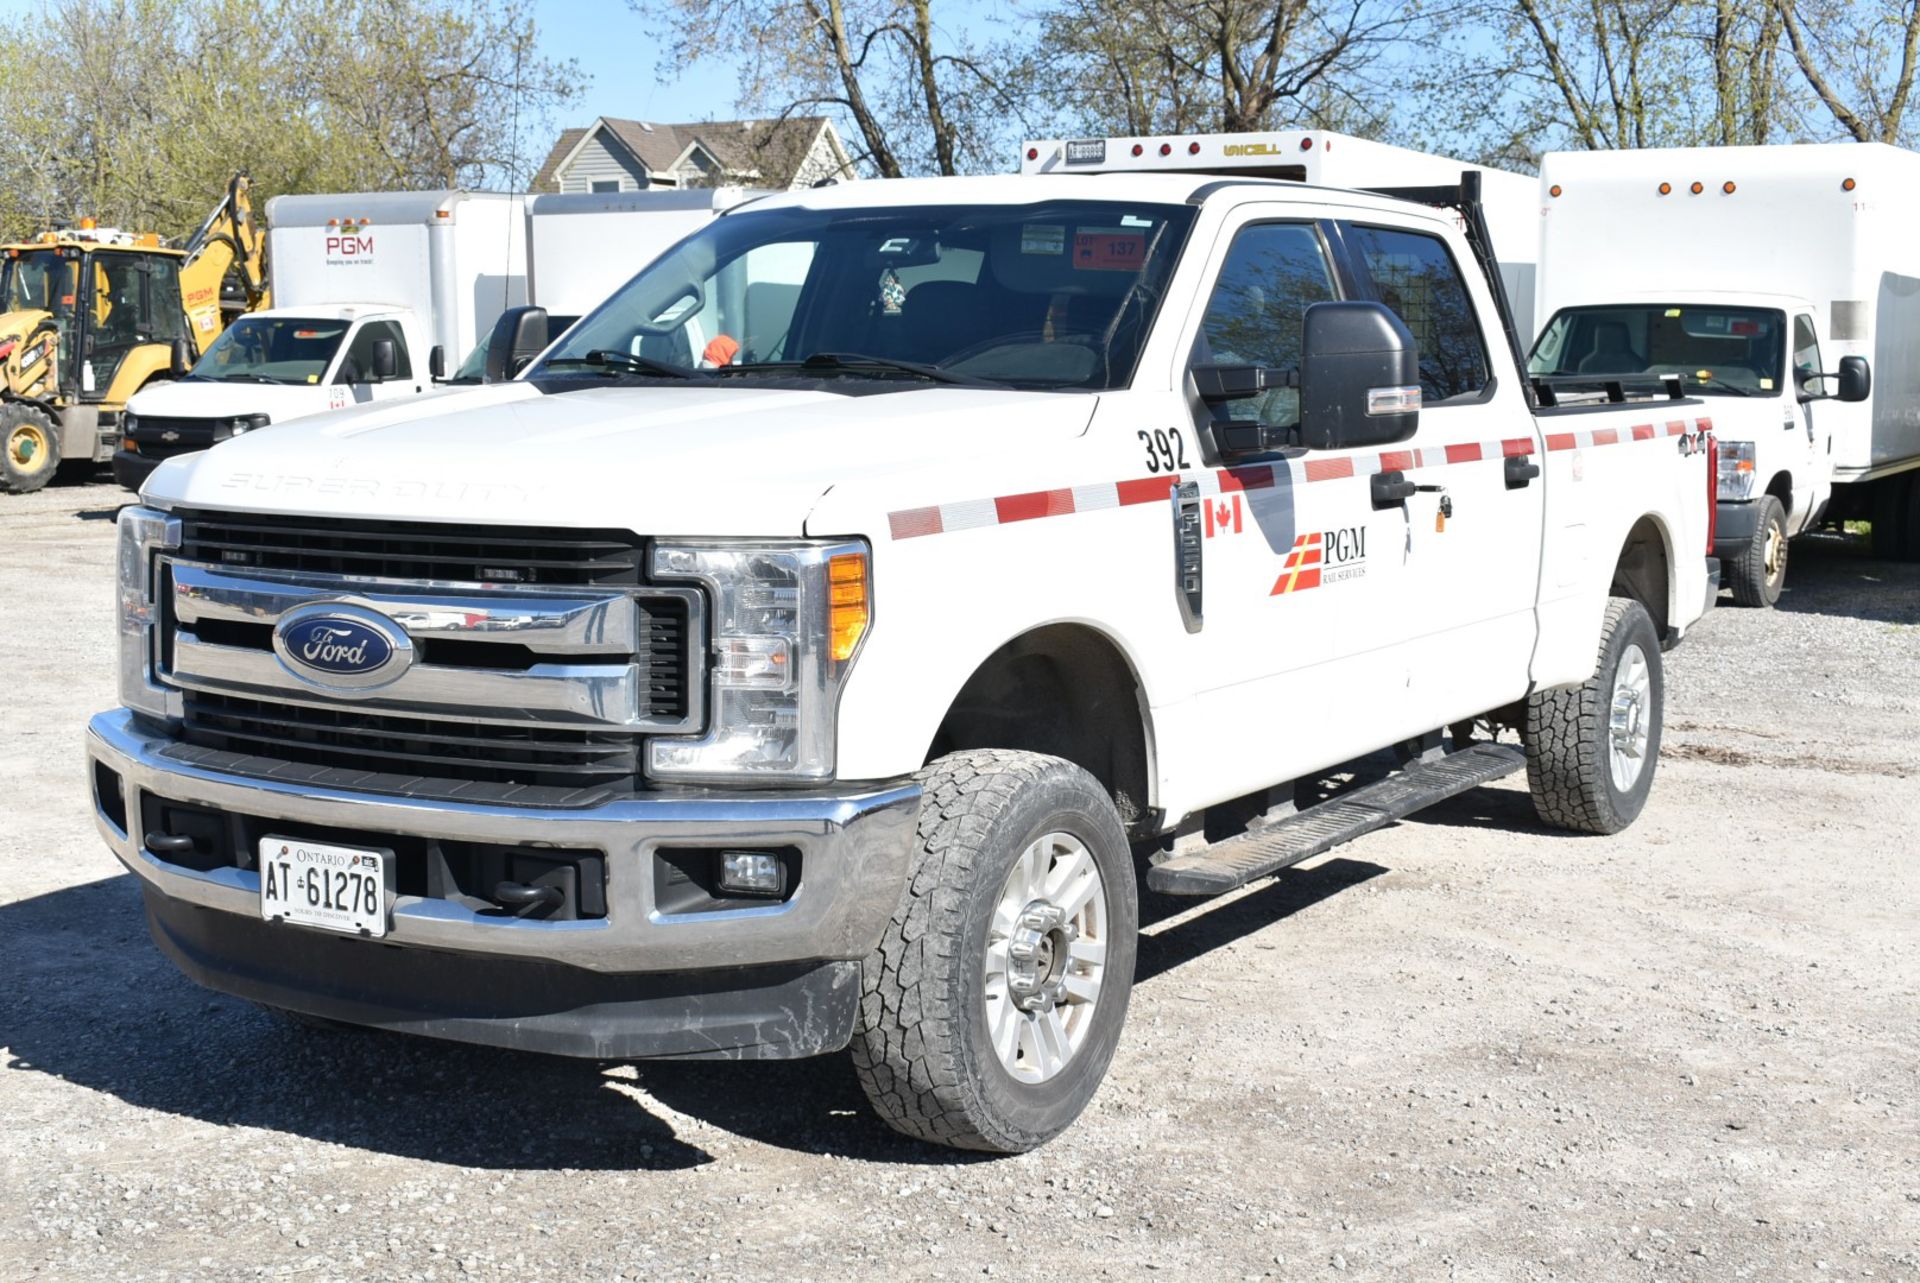 FORD (2017) F250 XLT SUPER DUTY CREW CAB PICKUP TRUCK WITH 6.2L 8 CYL. GAS ENGINE, AUTO.